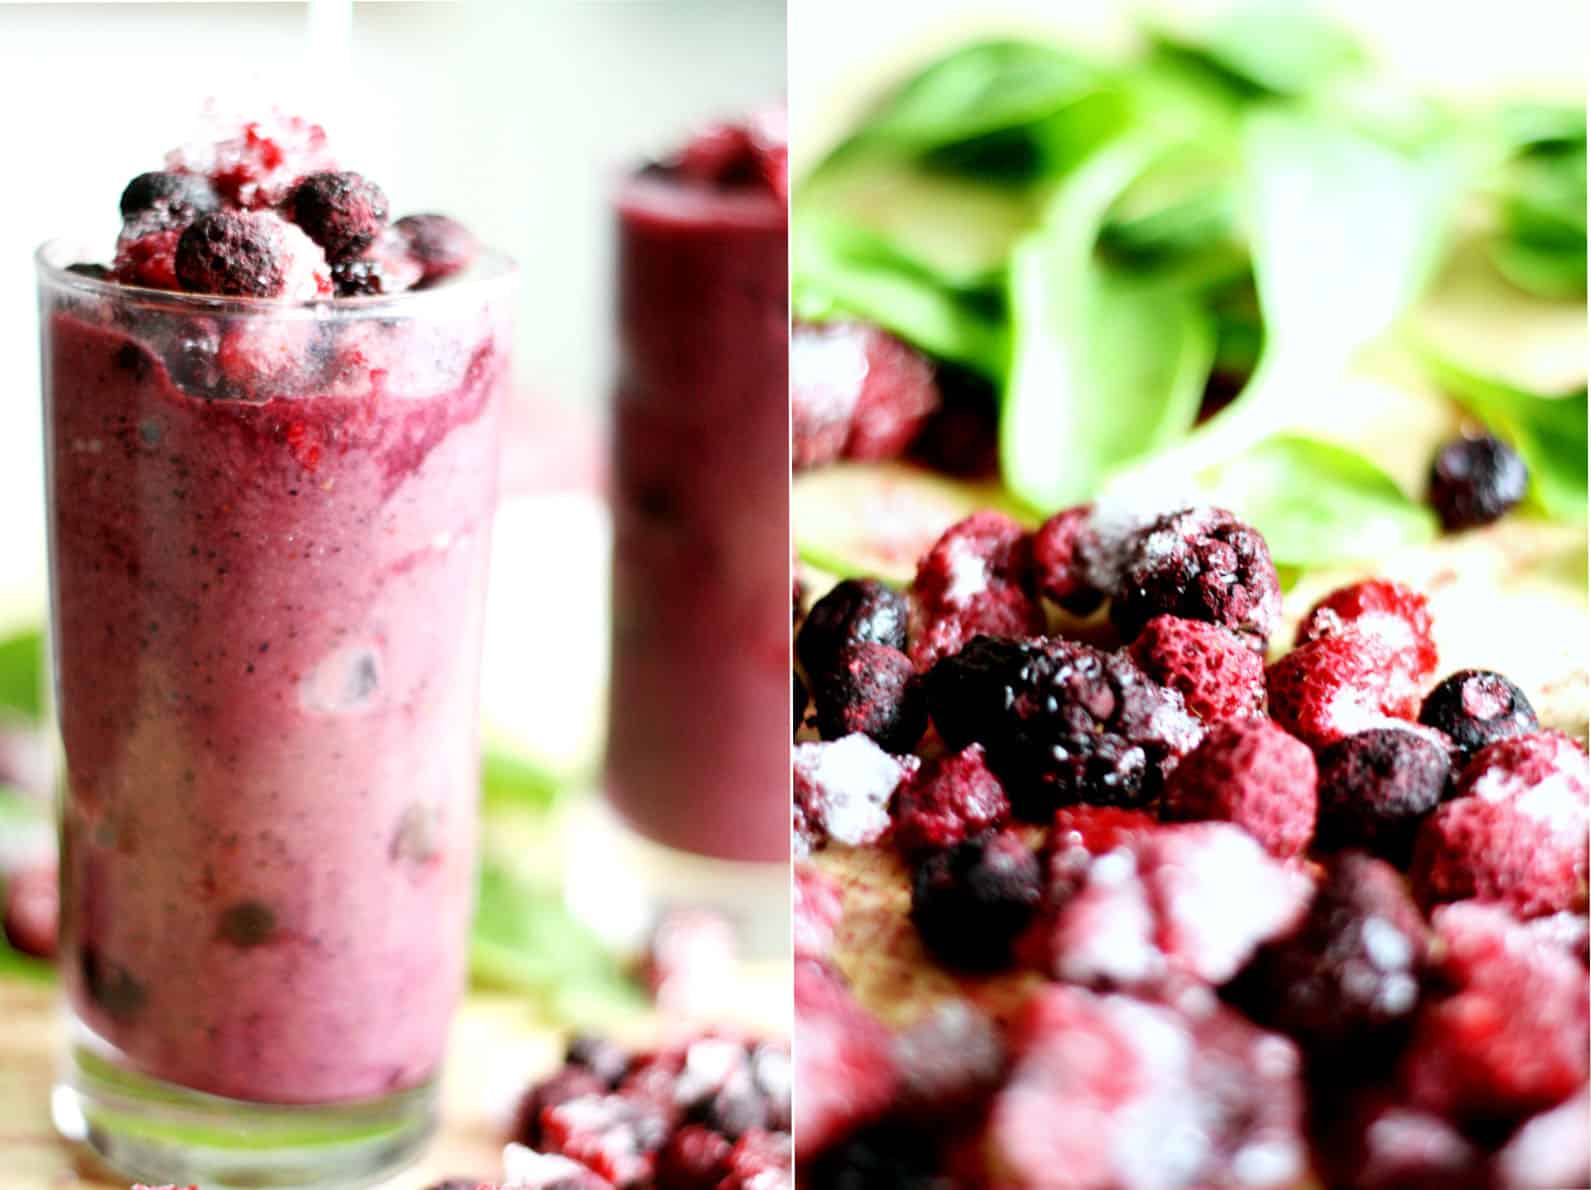 Get back on track with this spinach and berry smoothie! This smoothie recipe is packed with antioxidants and nutrients, plus it is straight-up delish.